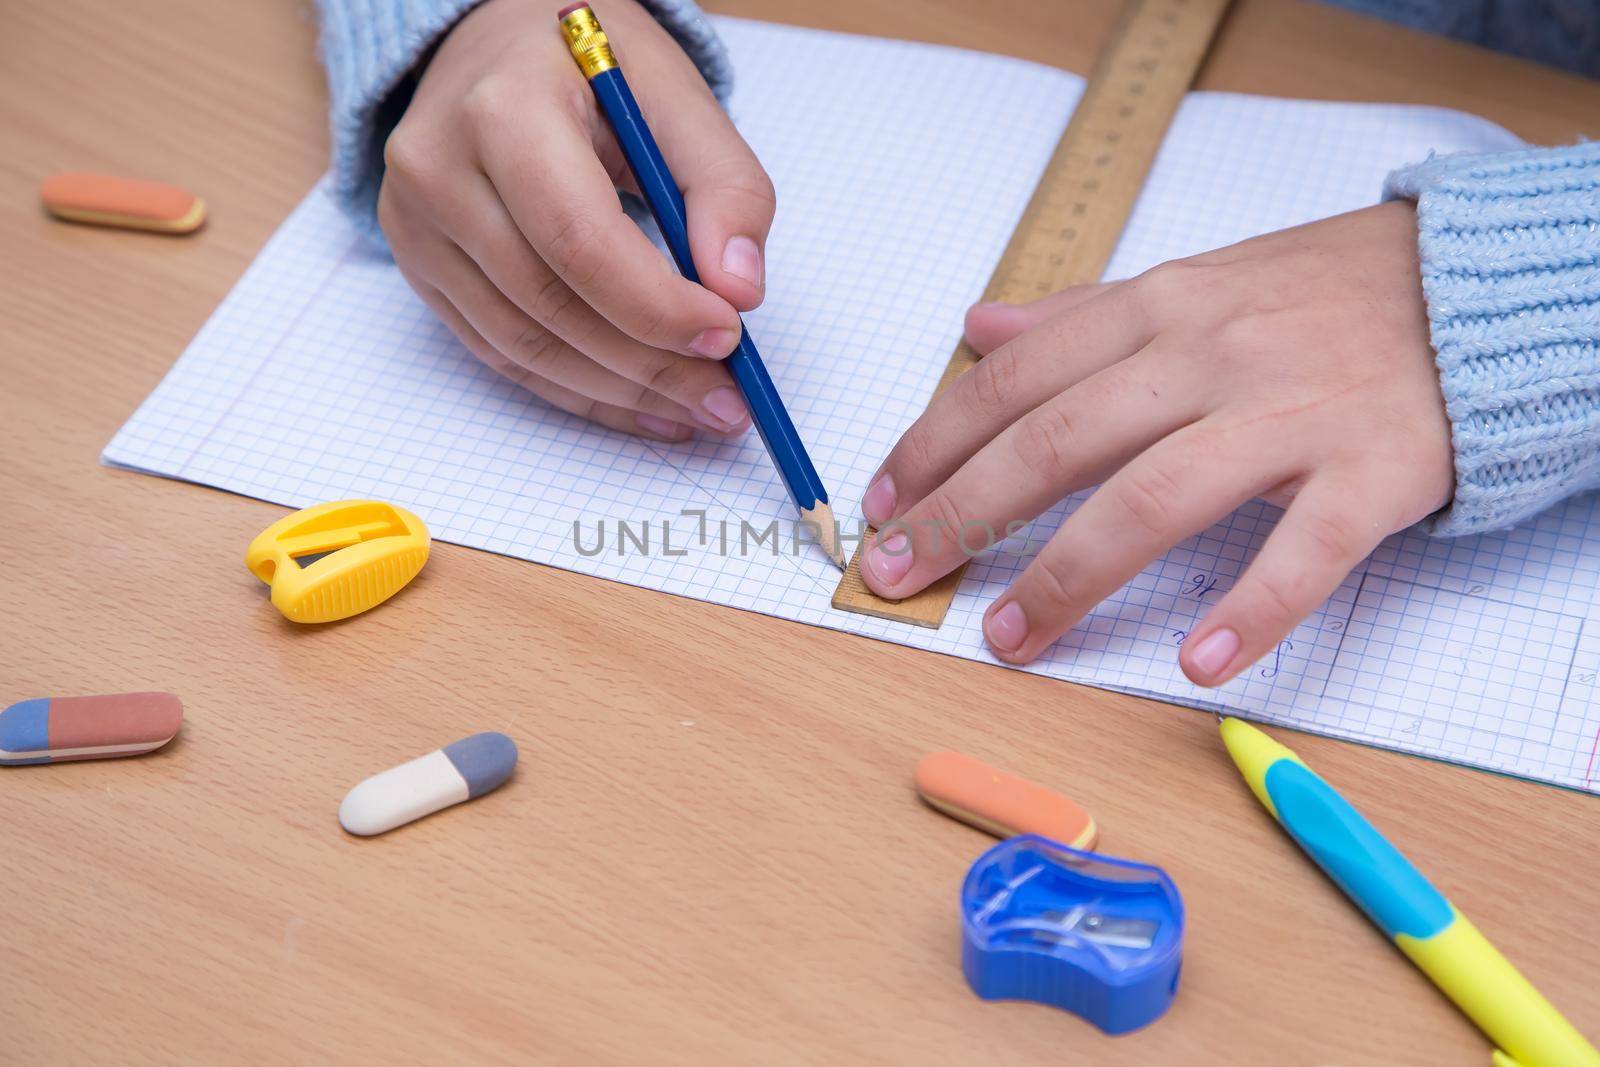 A student in a notebook draws a geometric figure with a pencil. A schoolboy performs a task at the workplace. The concept of children's education, teaching knowledge, skills and abilities.